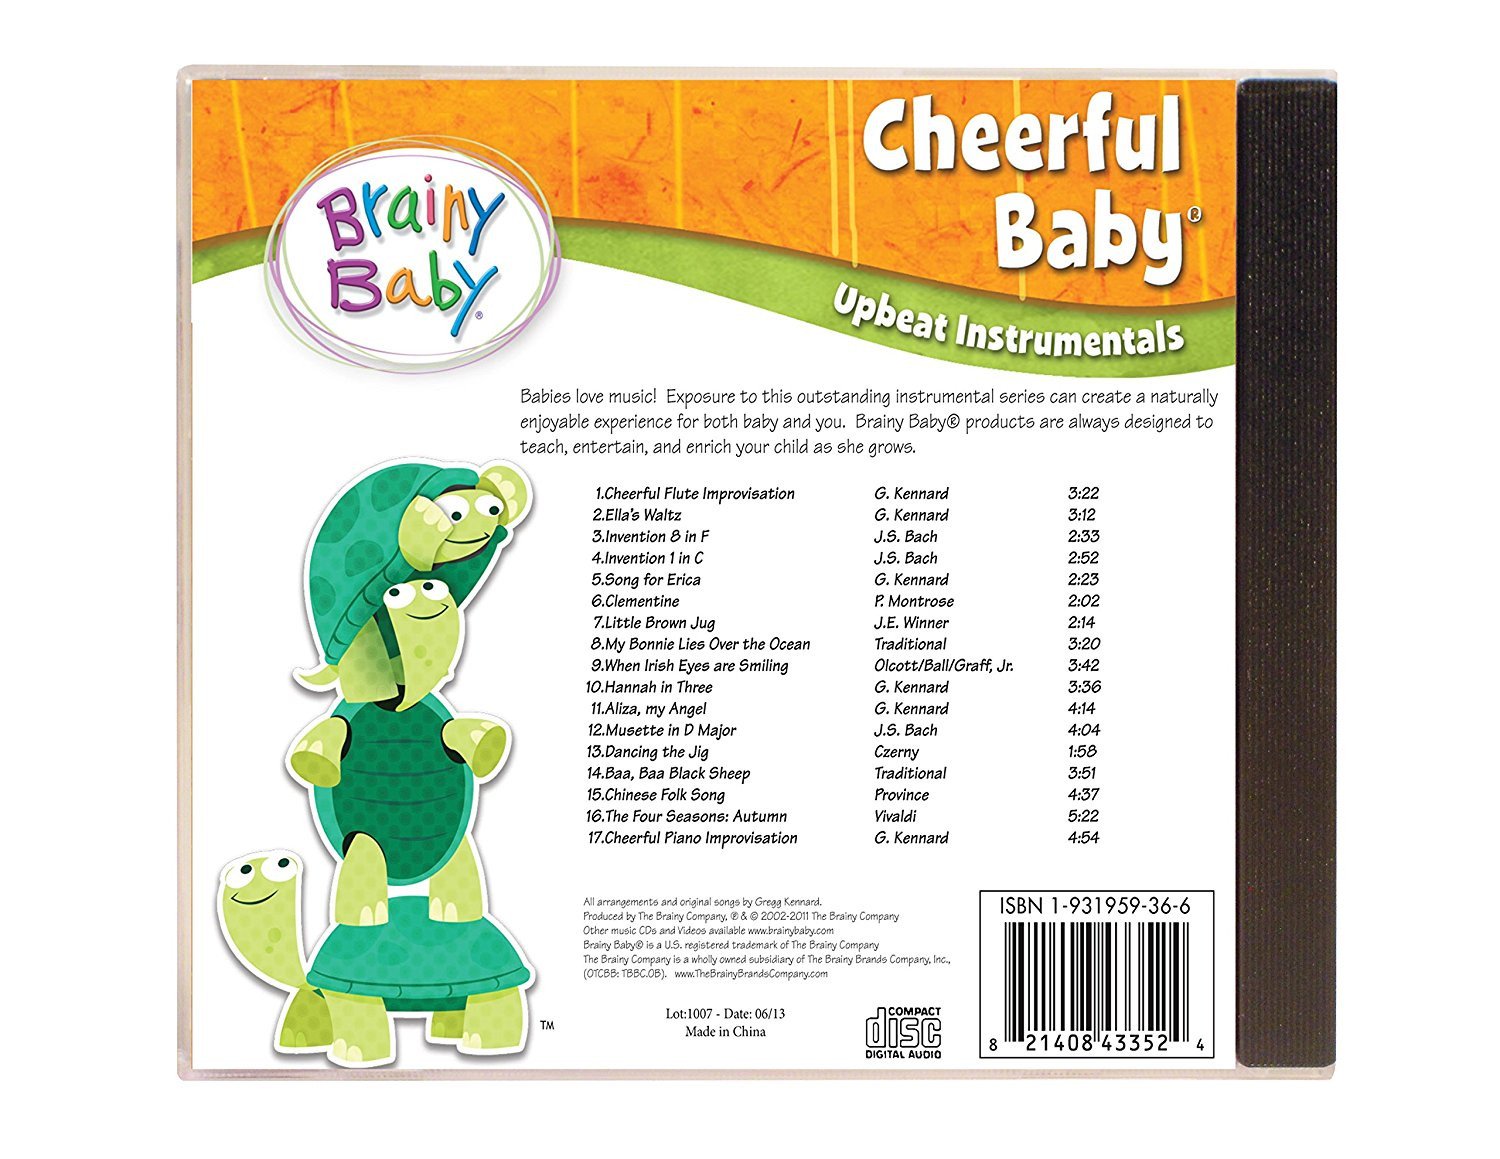 Brainy Baby Cheerful Baby Music CD Upbeat Instrumentals Song List Back Cover